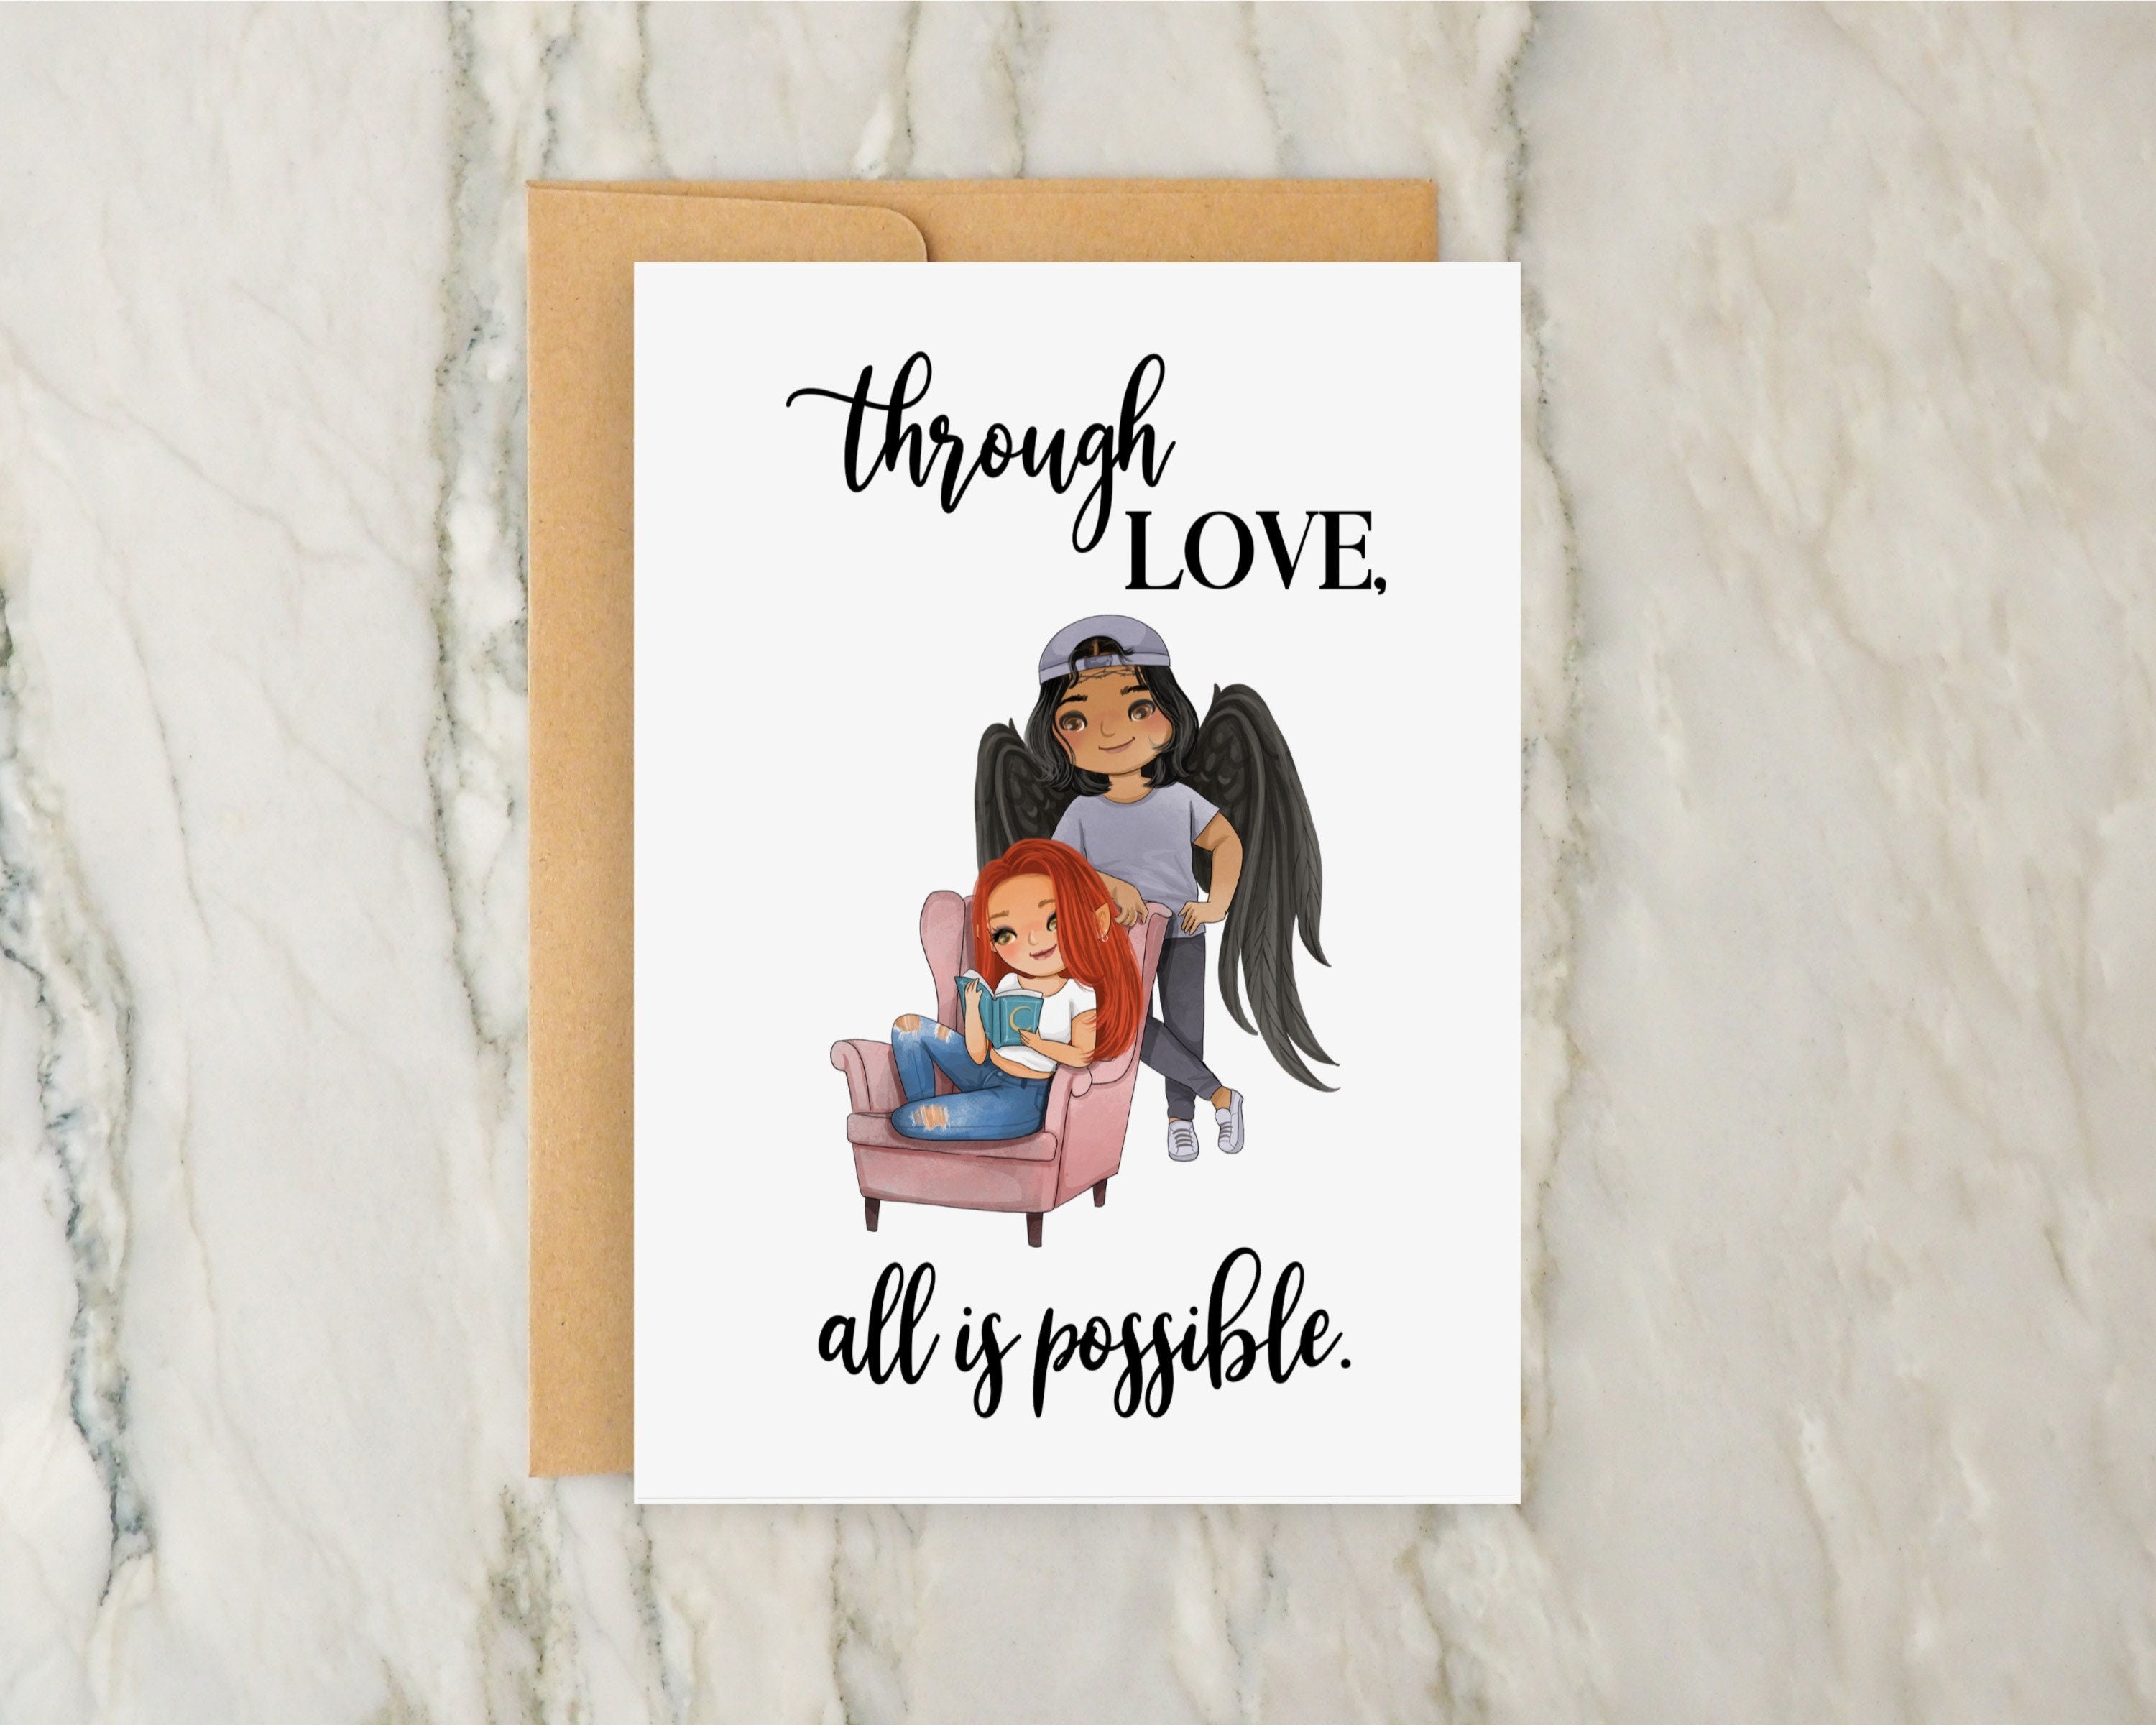 Crescent City Greeting Card 5x7 - Through Love All Is Possible 